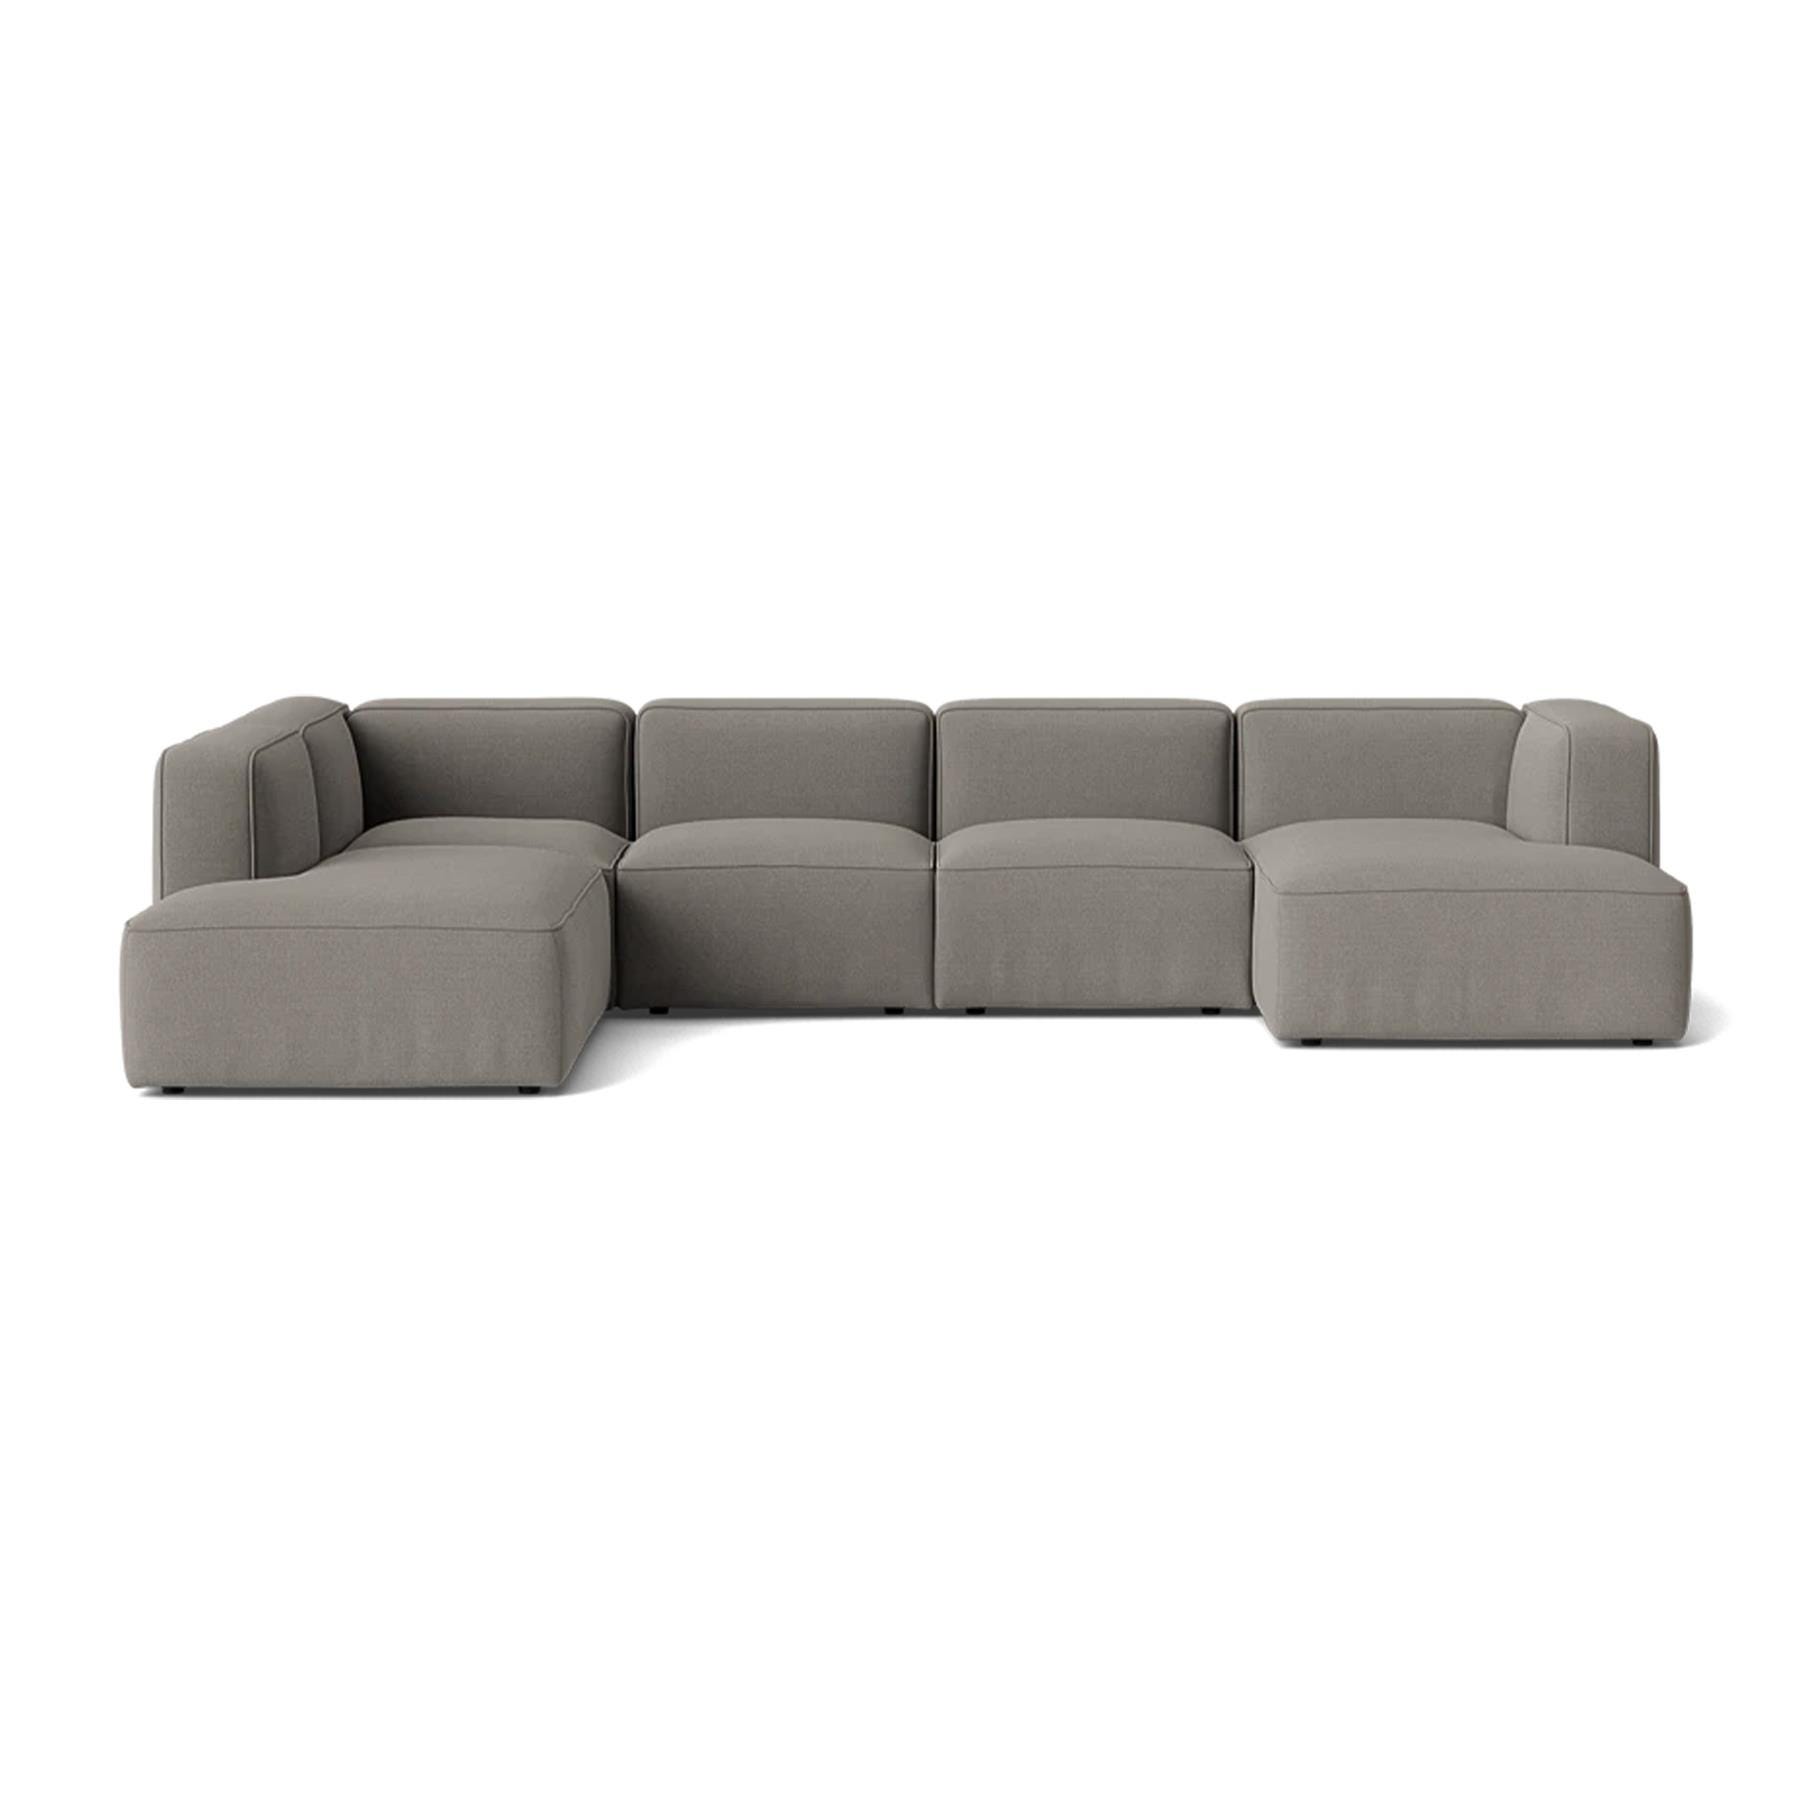 Make Nordic Basecamp Family Sofa Fiord 262 Right Brown Designer Furniture From Holloways Of Ludlow